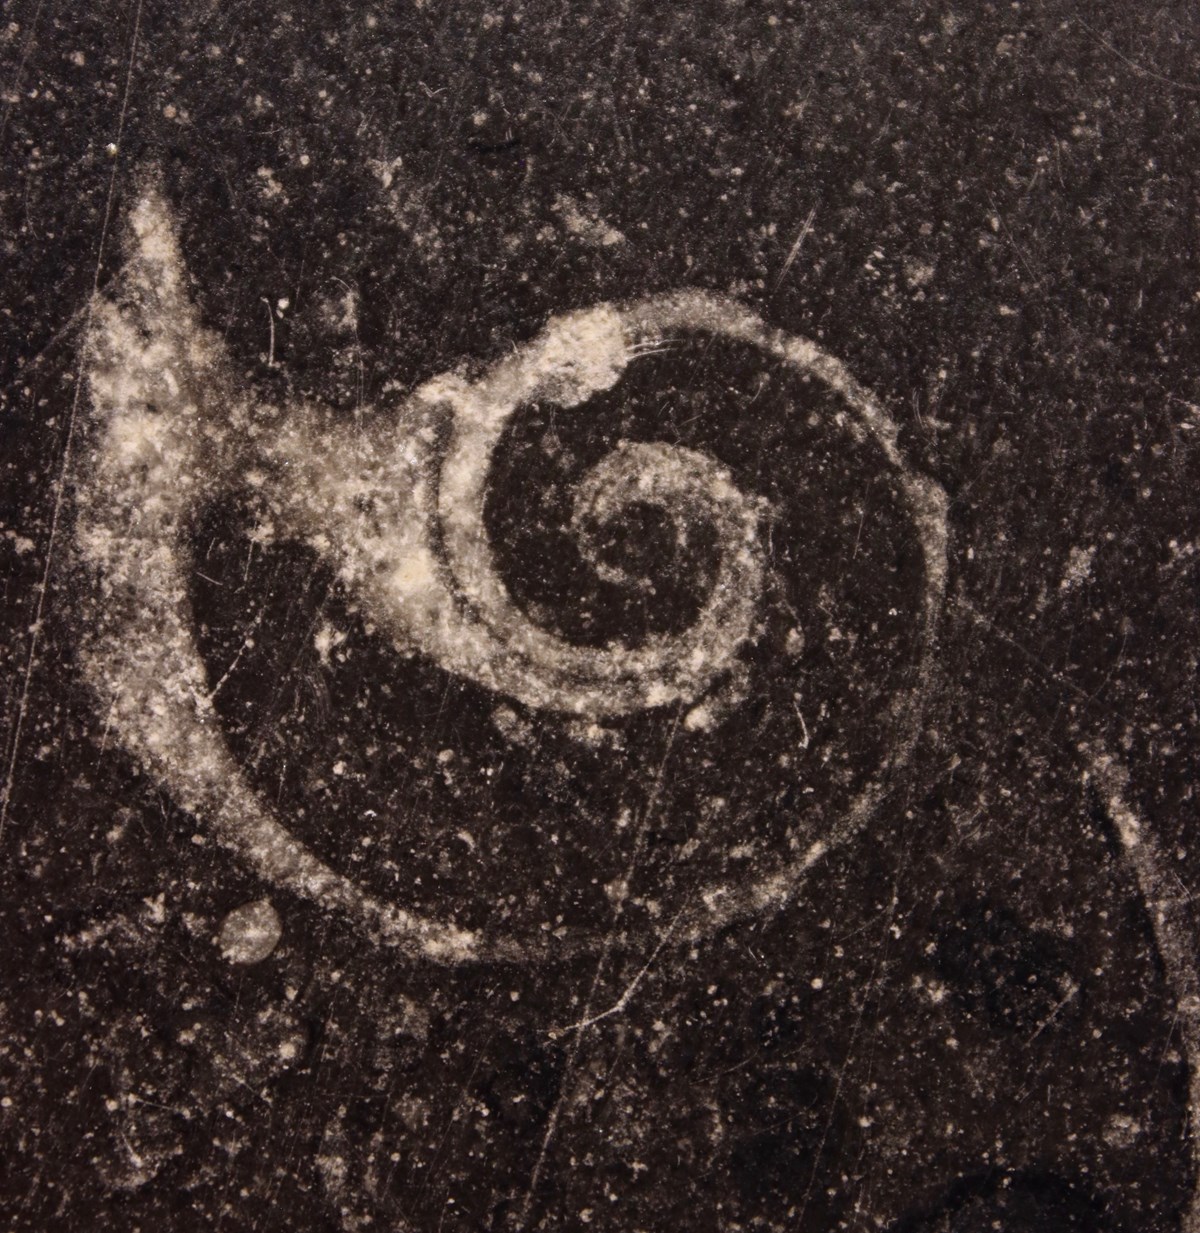 stone surface with fossil snail